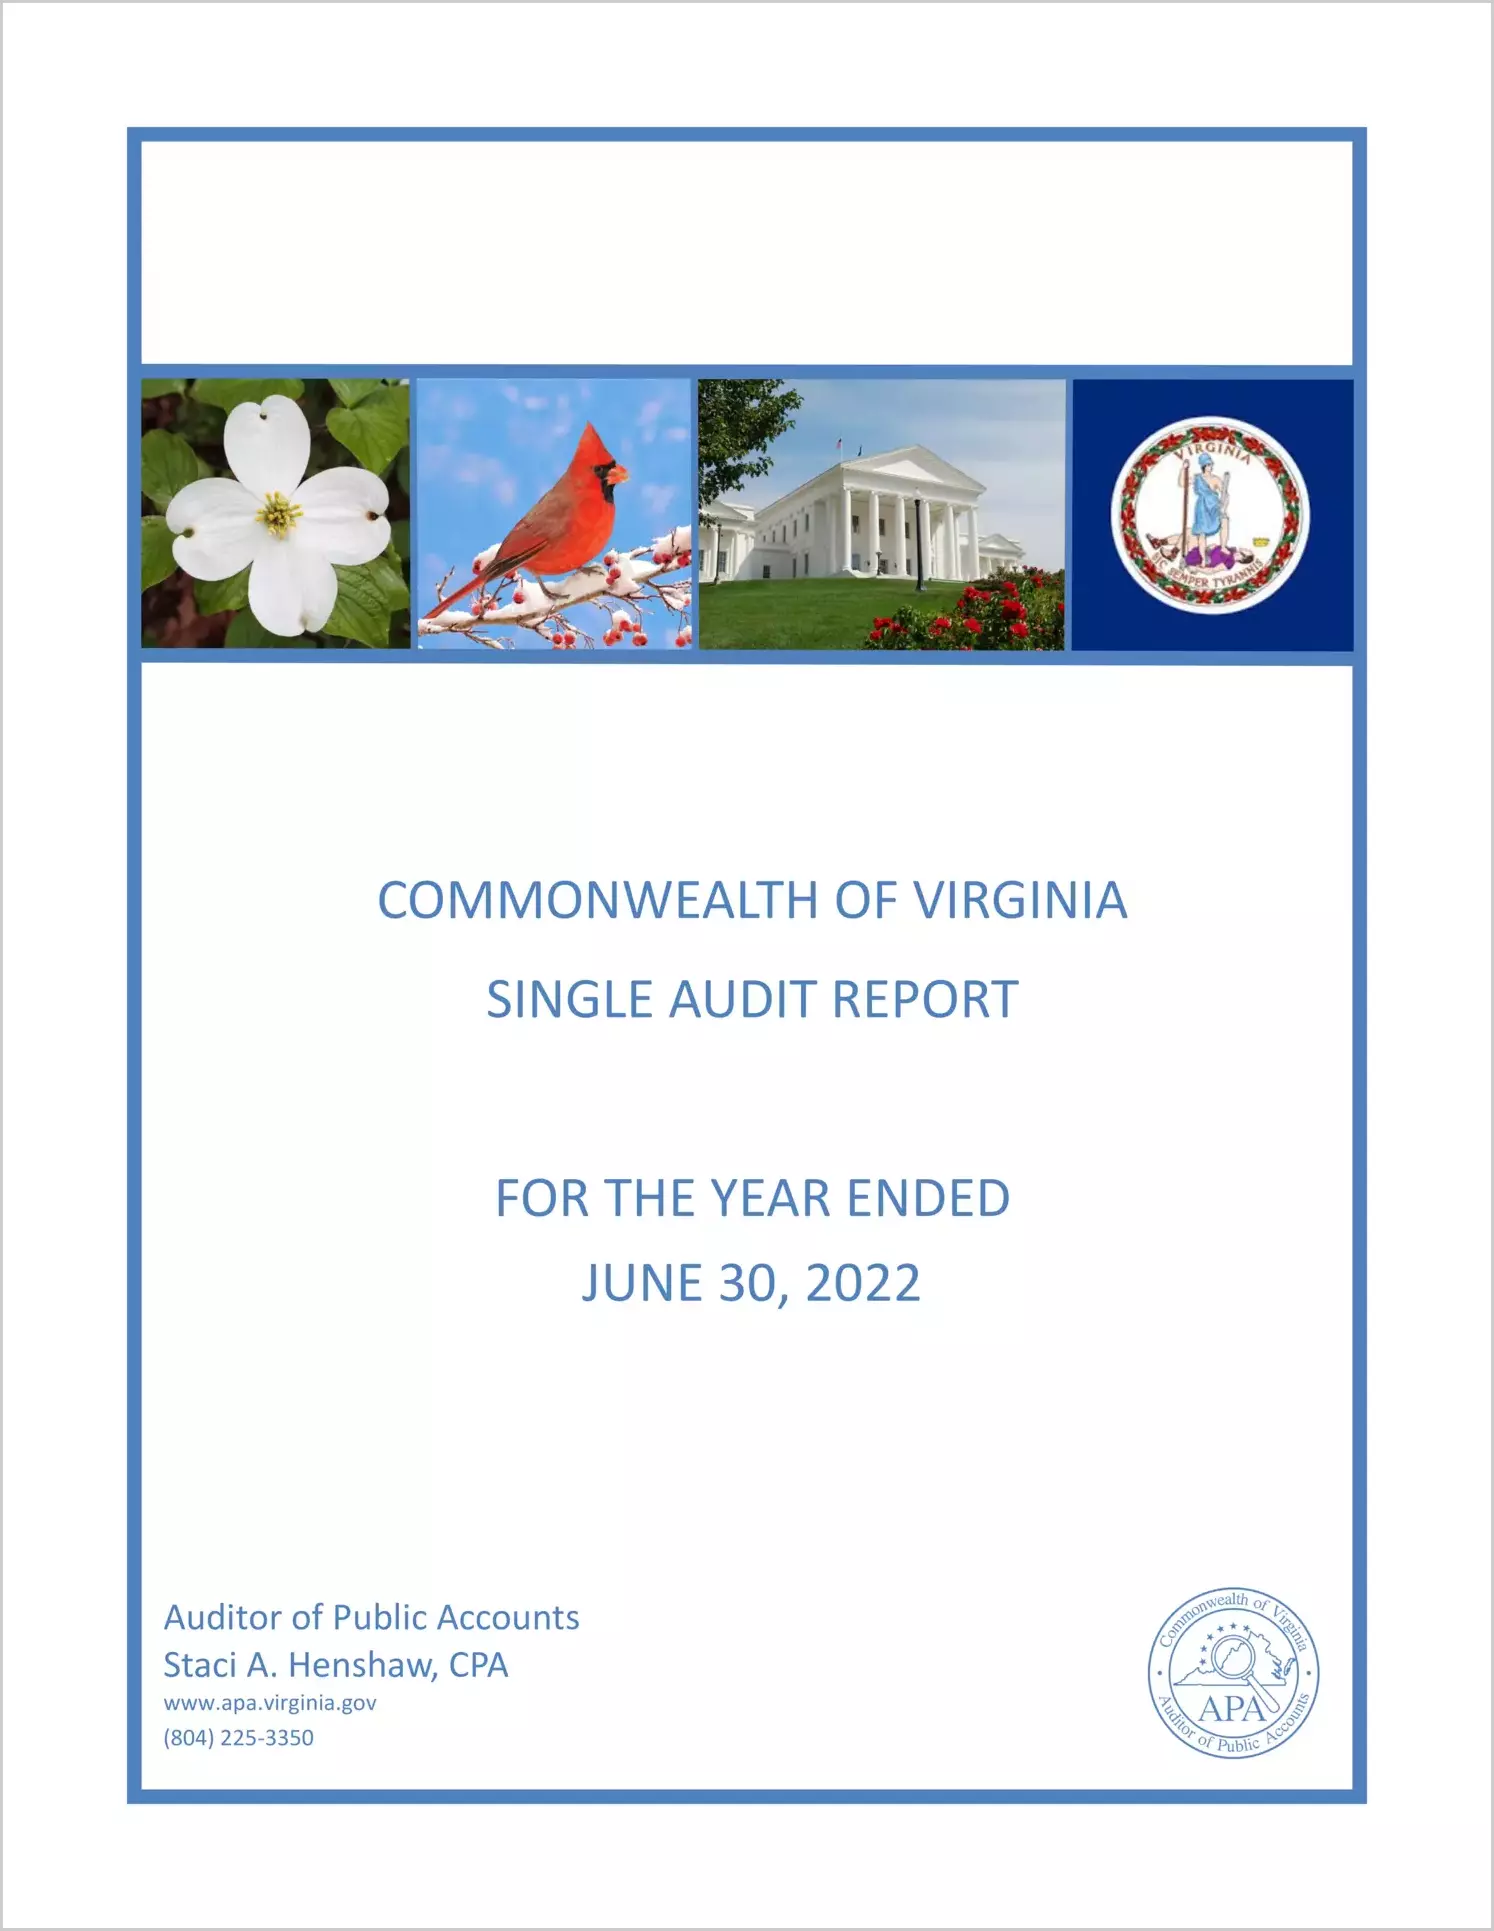 Commonwealth of Virginia Single Audit Report for the Year Ended June 30, 2022